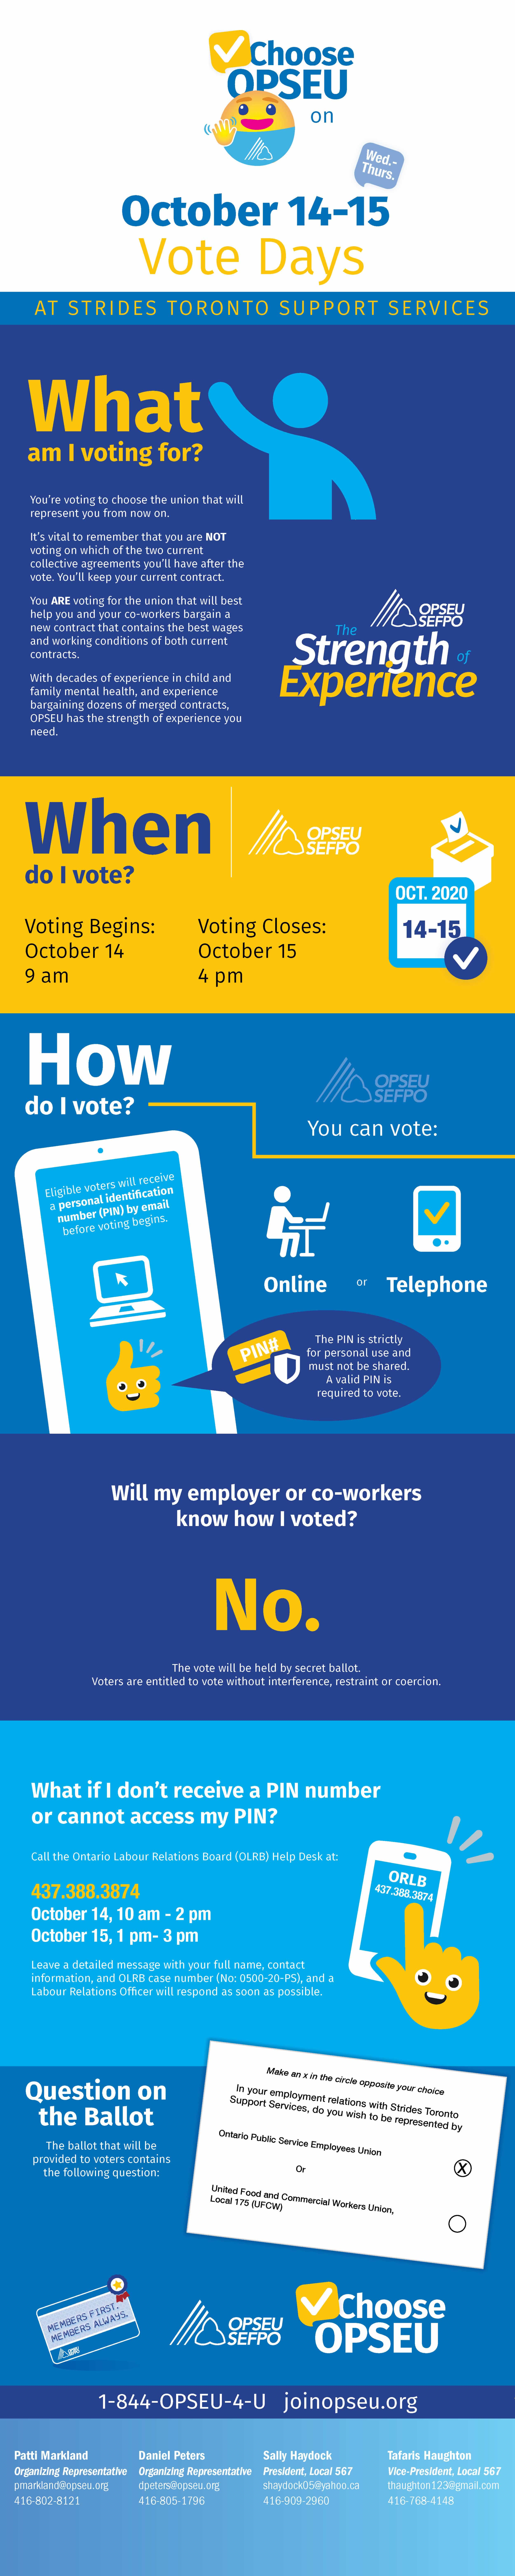 Choose OPSEU Infographic, October 13-15, Vote Days.